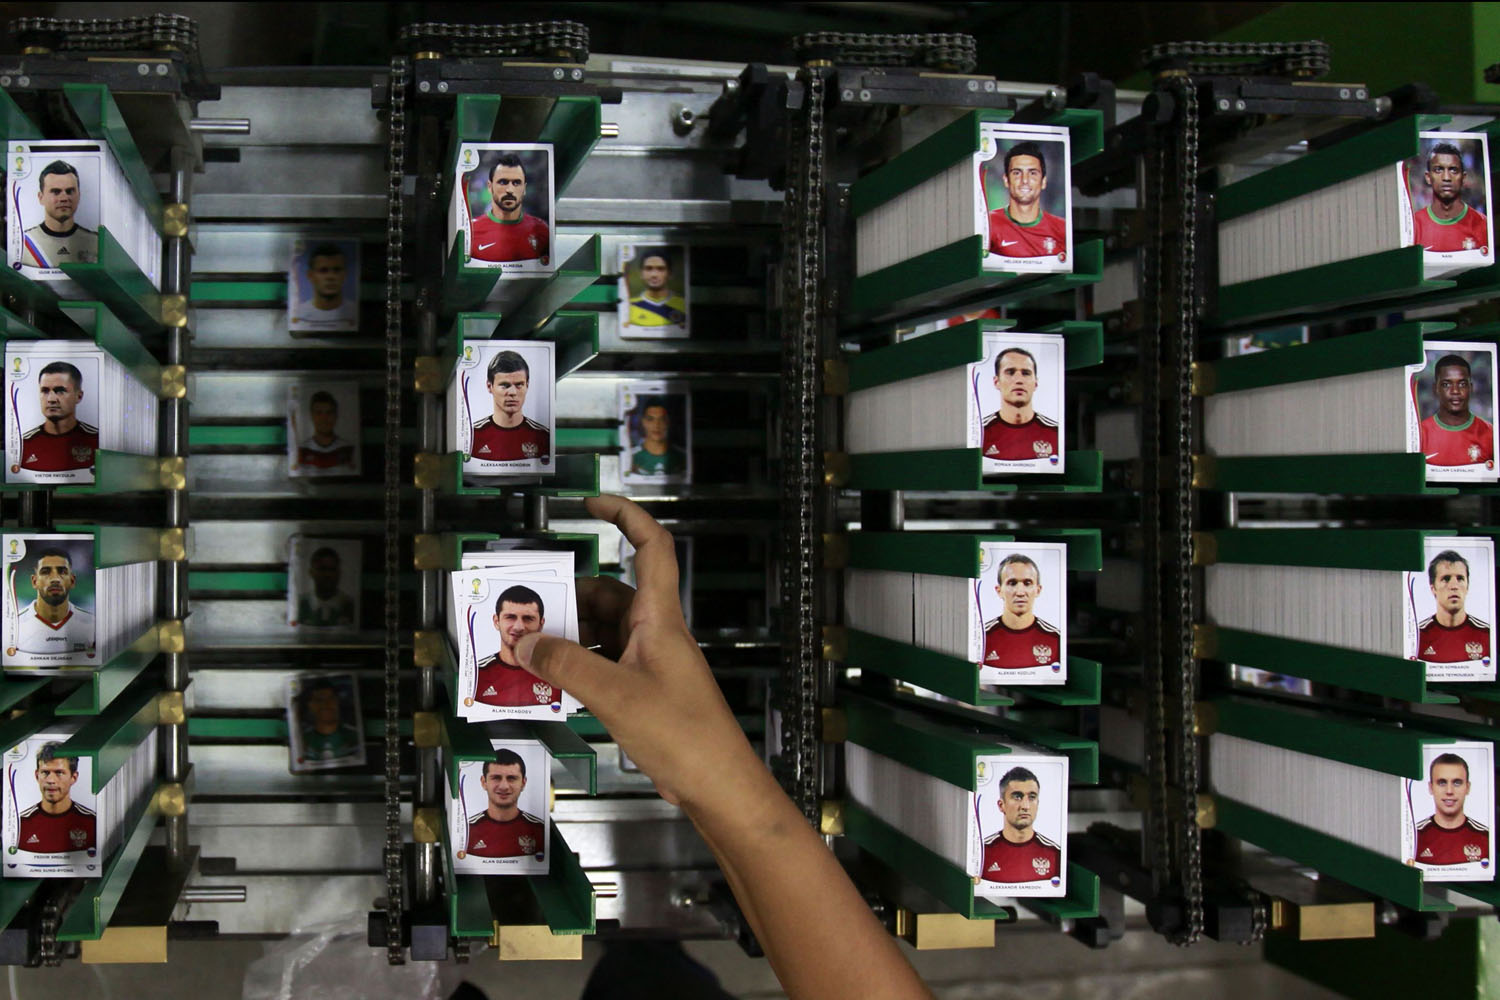 A labourer works at the assembly line of Panini's factory, where the FIFA's Brazil World Cup stickers and albums are been produced, in Tambore, an industrial suburb north of Sao Paulo